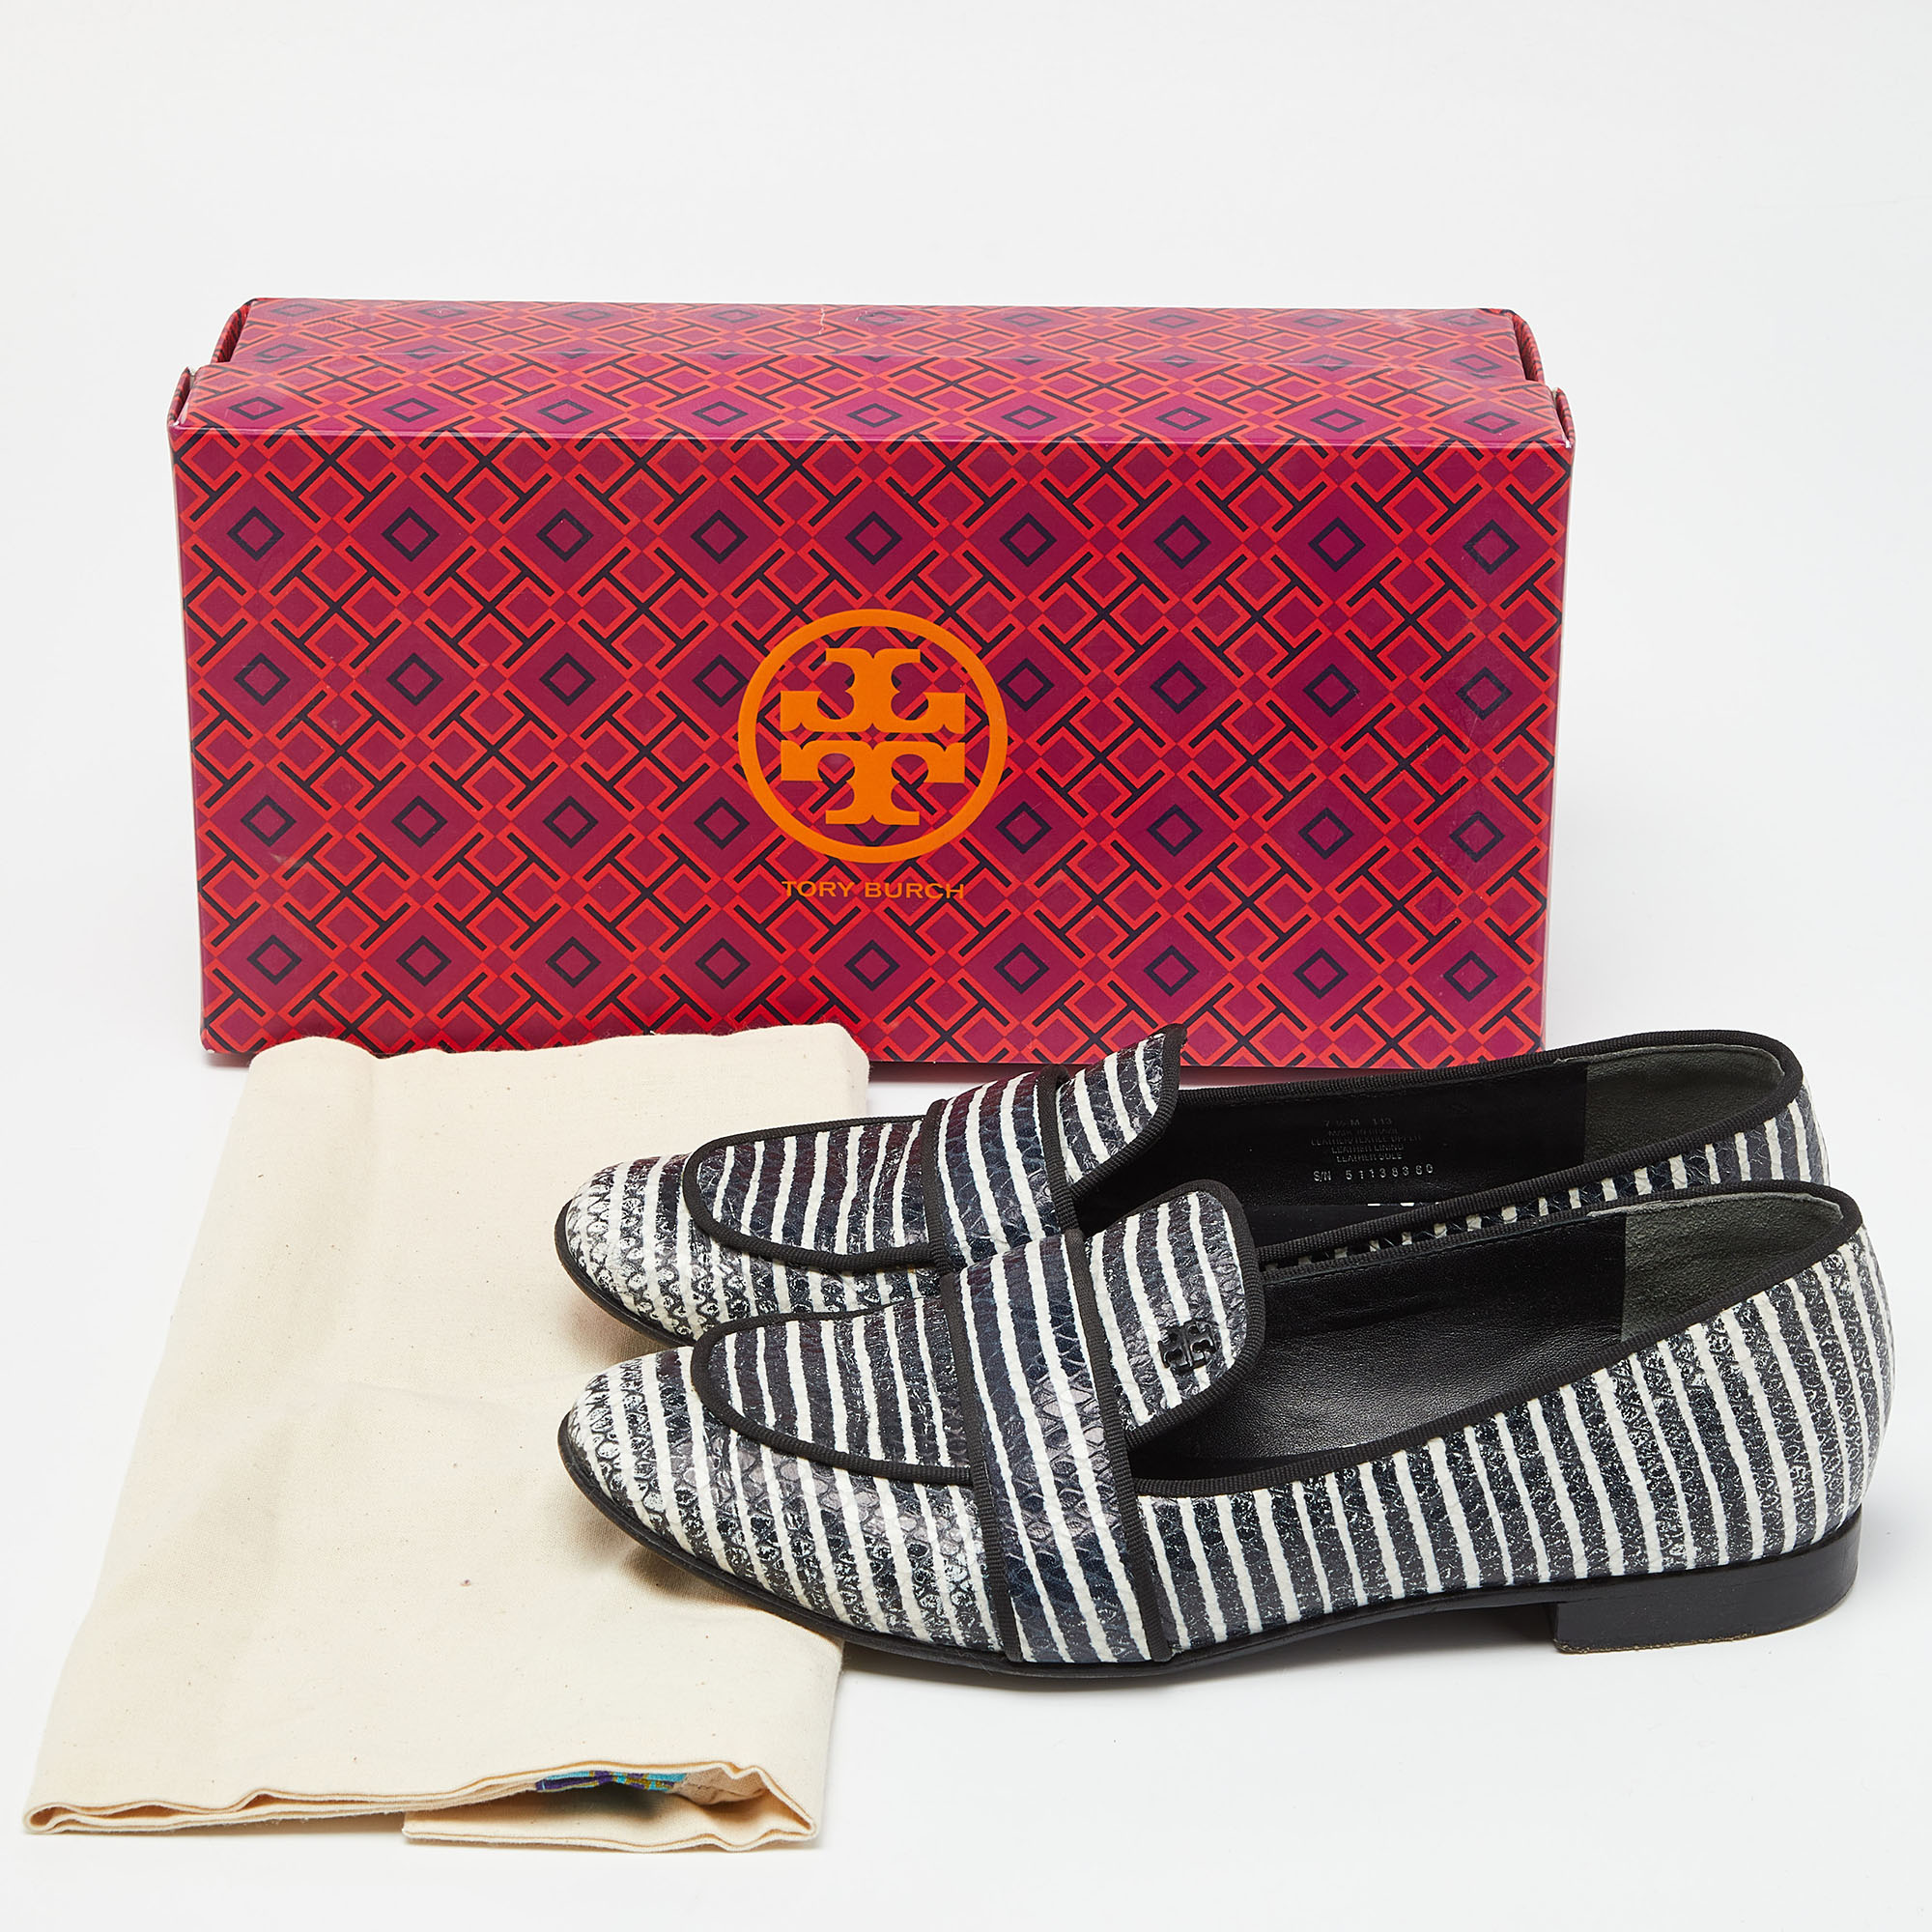 Tory Burch Blue/White Stripe Snakeskin Embossed Leather Smoking Slippers Size 38